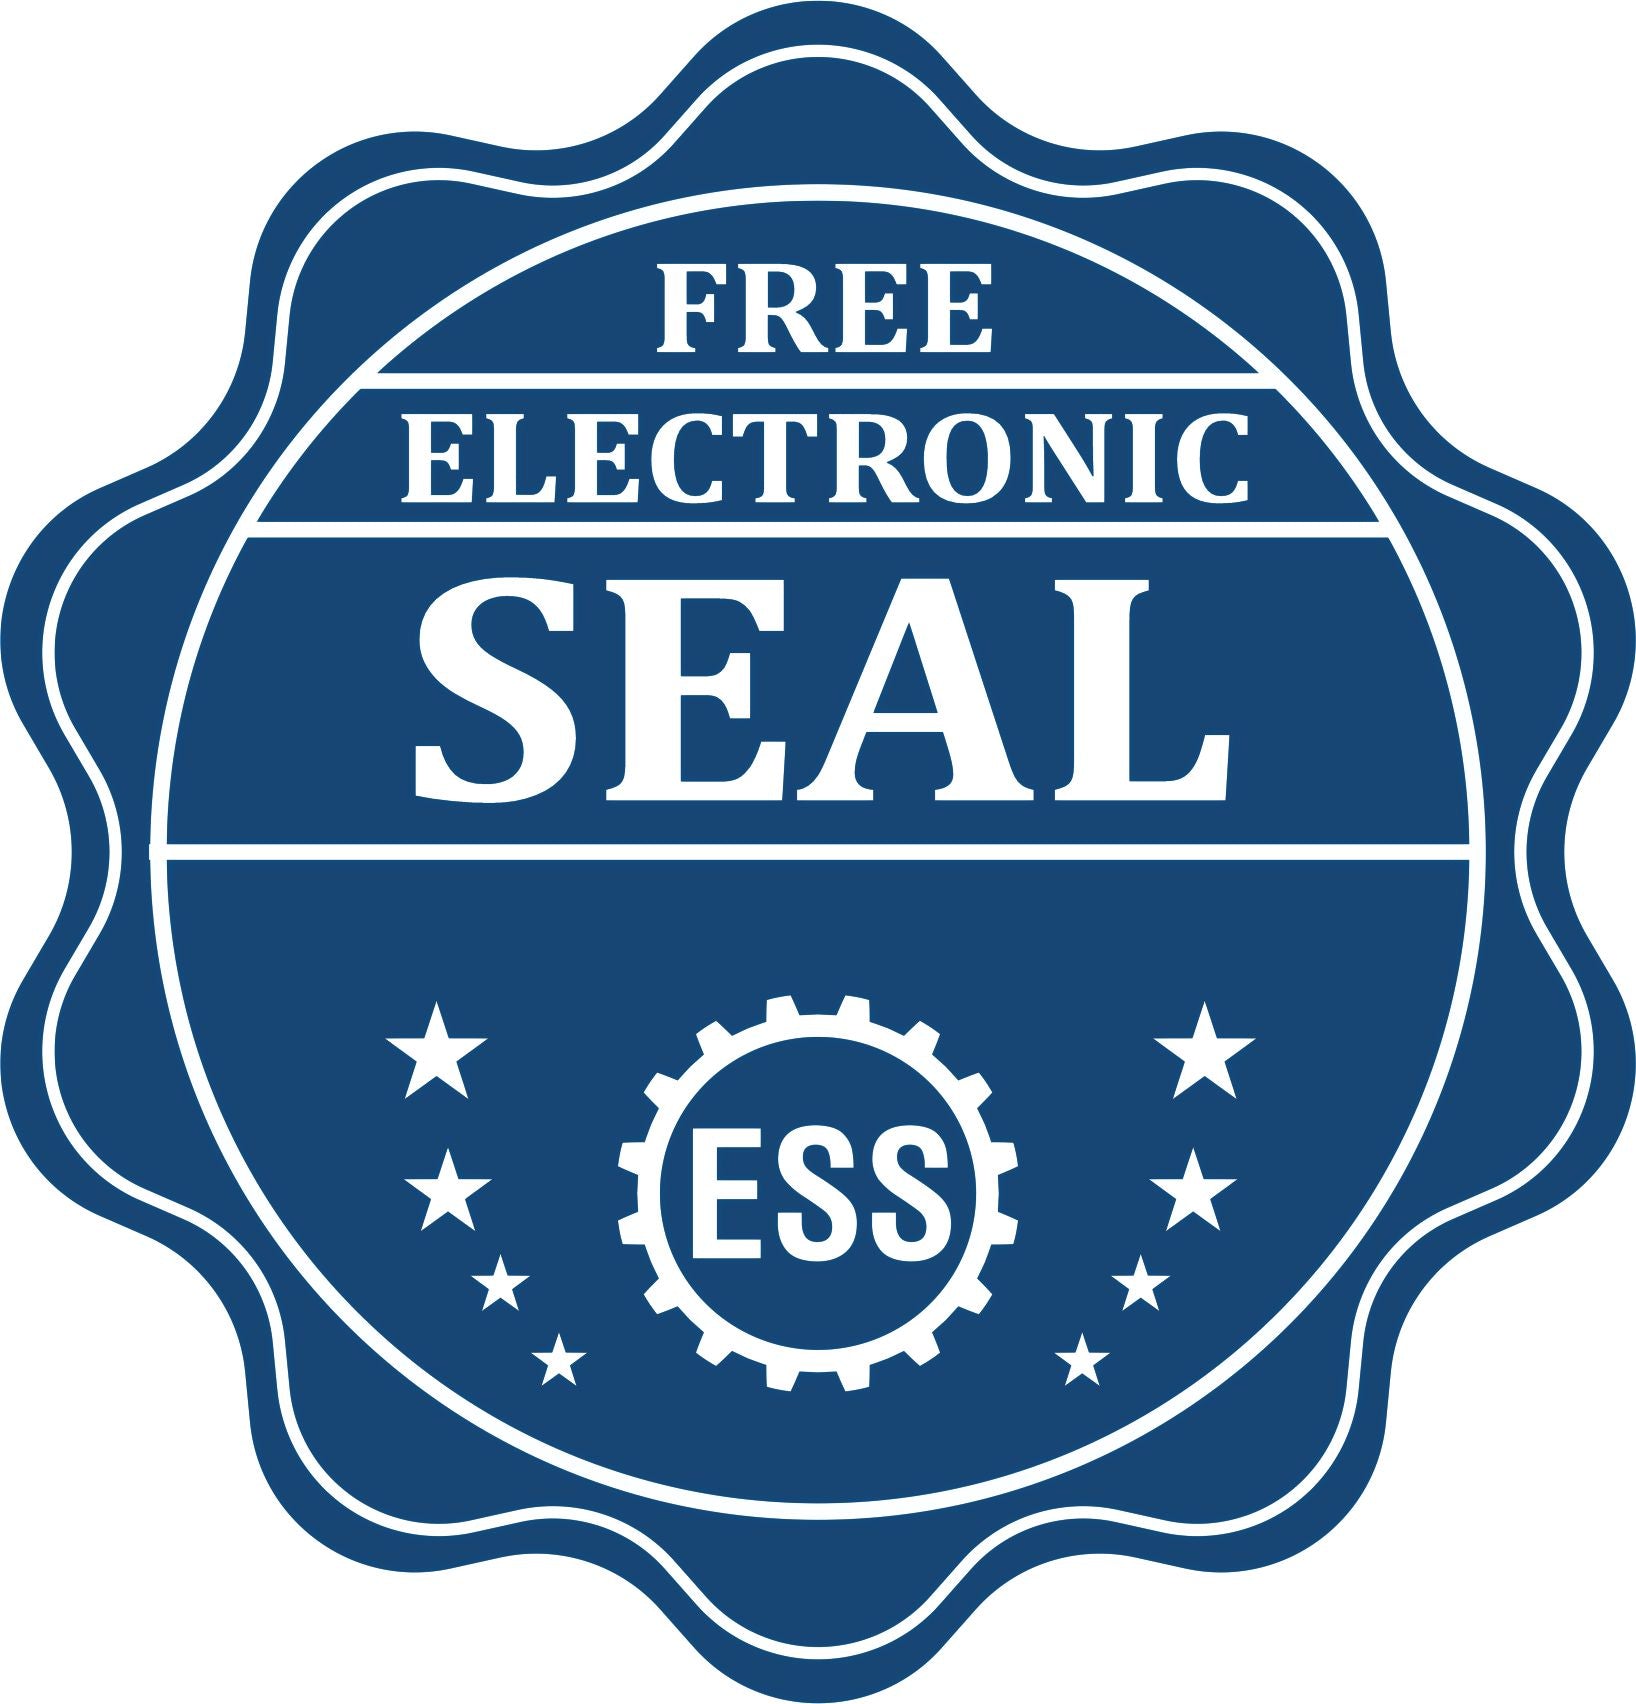 A badge showing a free electronic seal for the State of South Carolina Extended Long Reach Geologist Seal with stars and the ESS gear on the emblem.